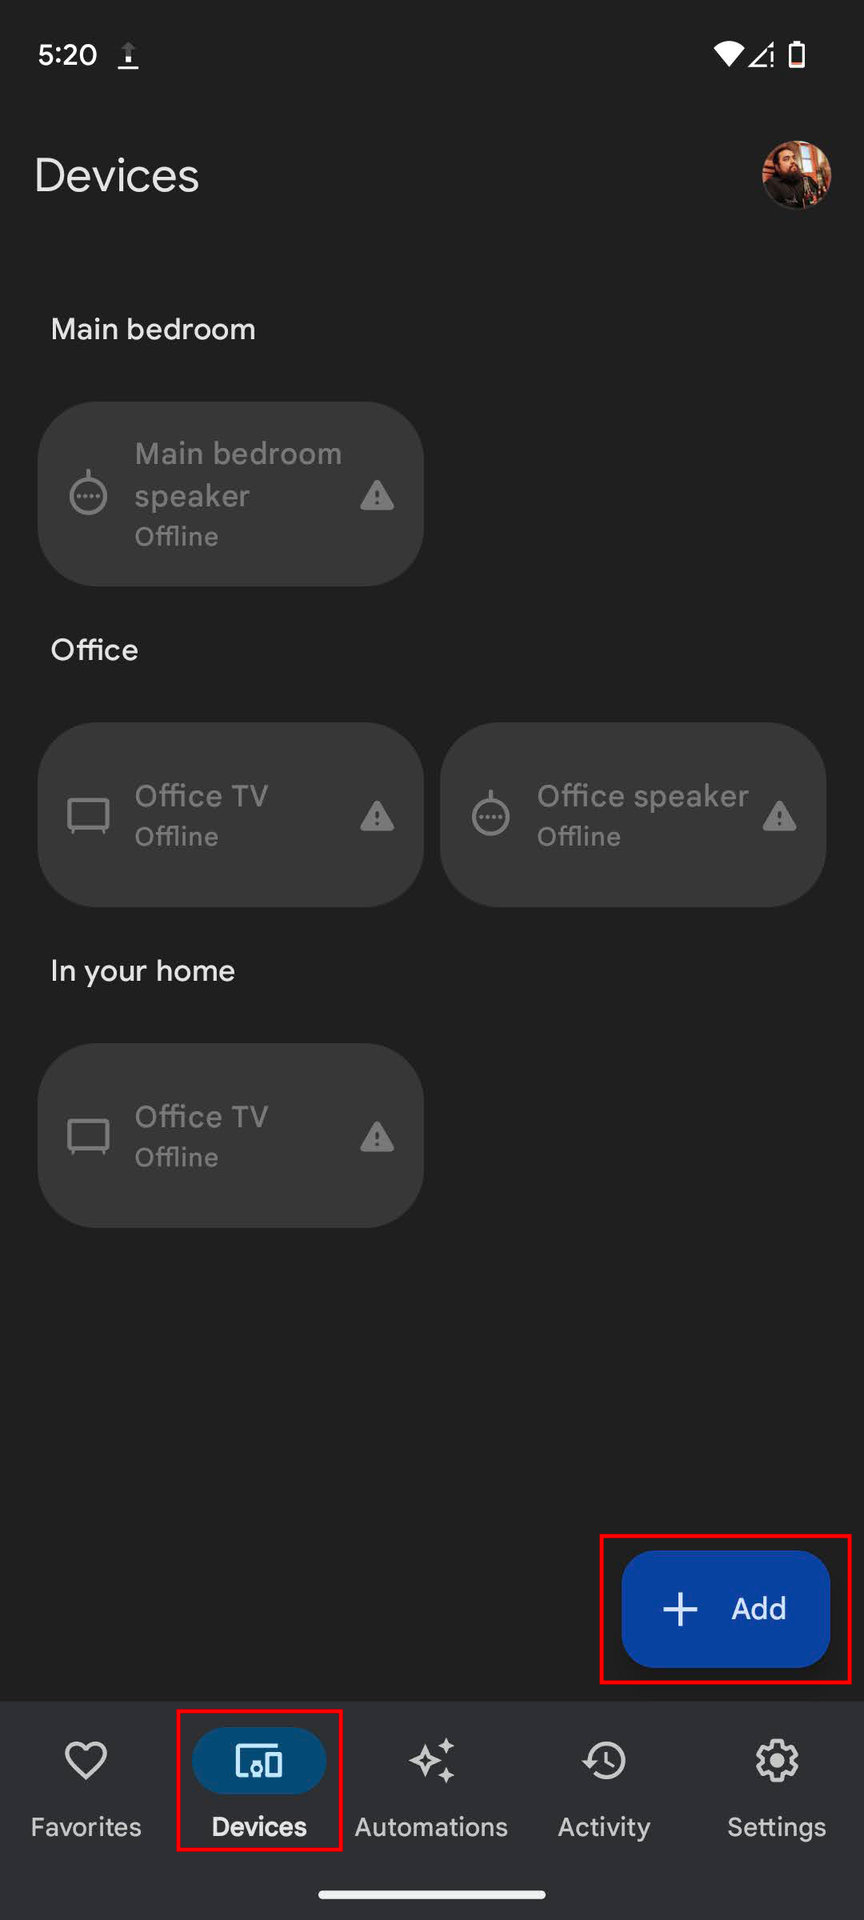 How to add devices to Google Home (1)